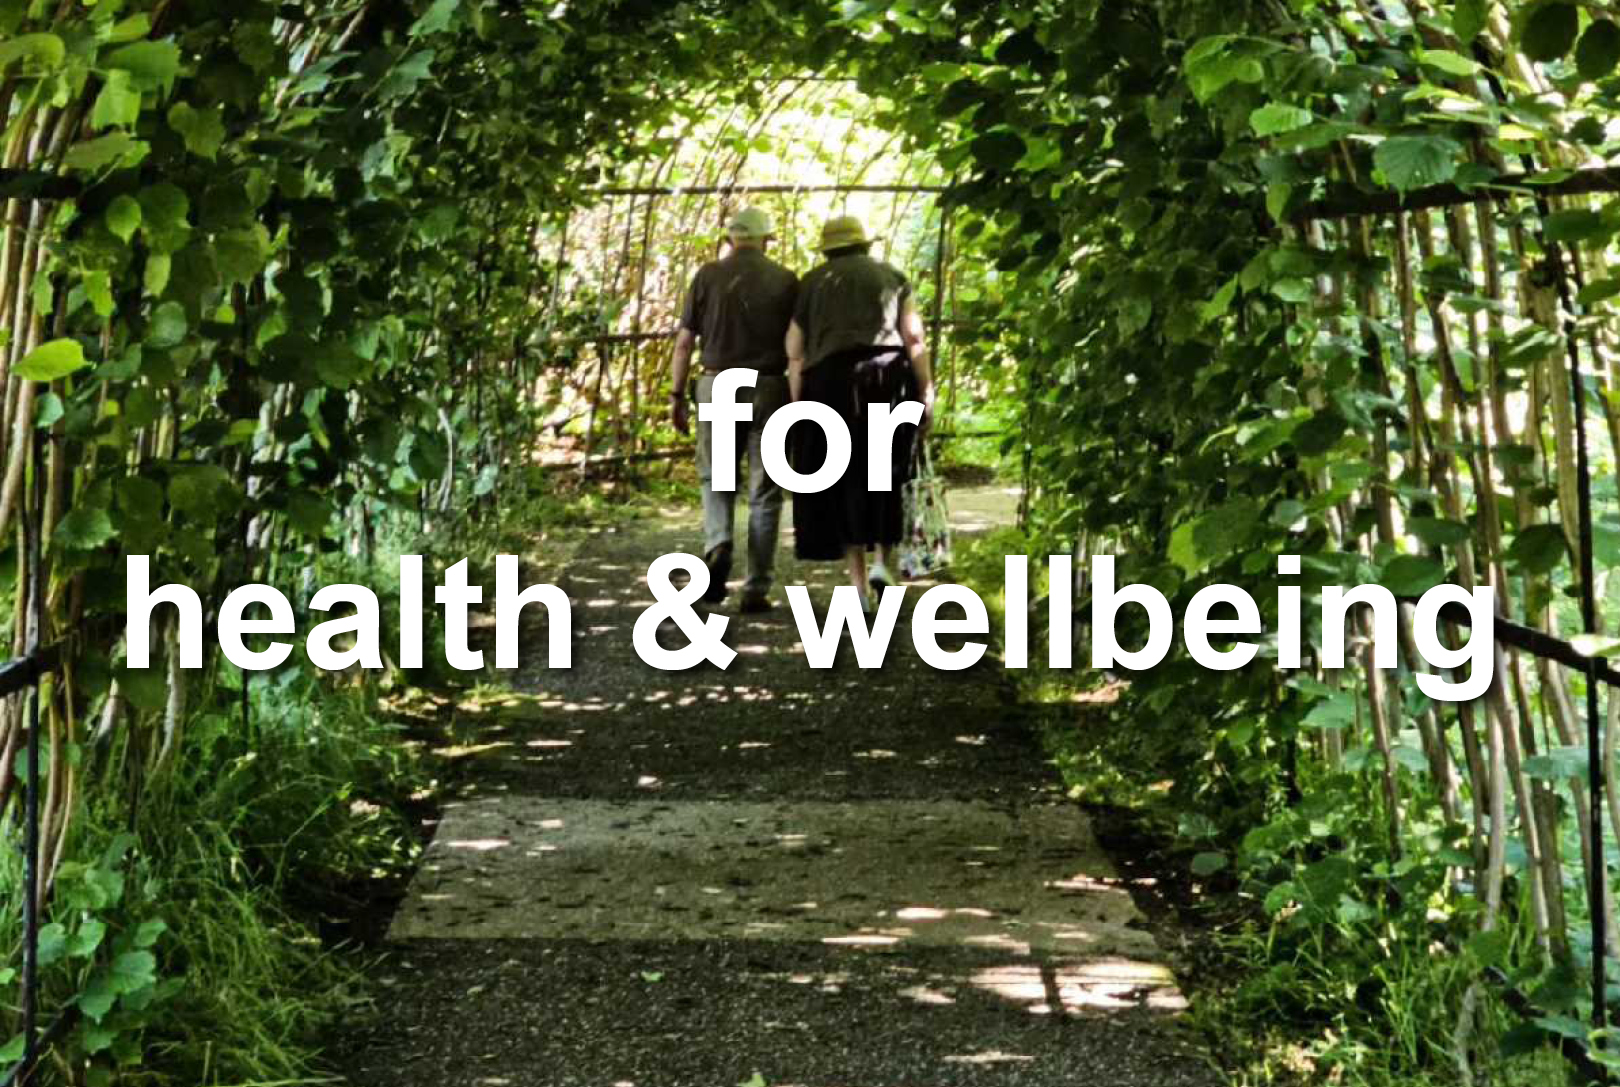 For health & wellbeing